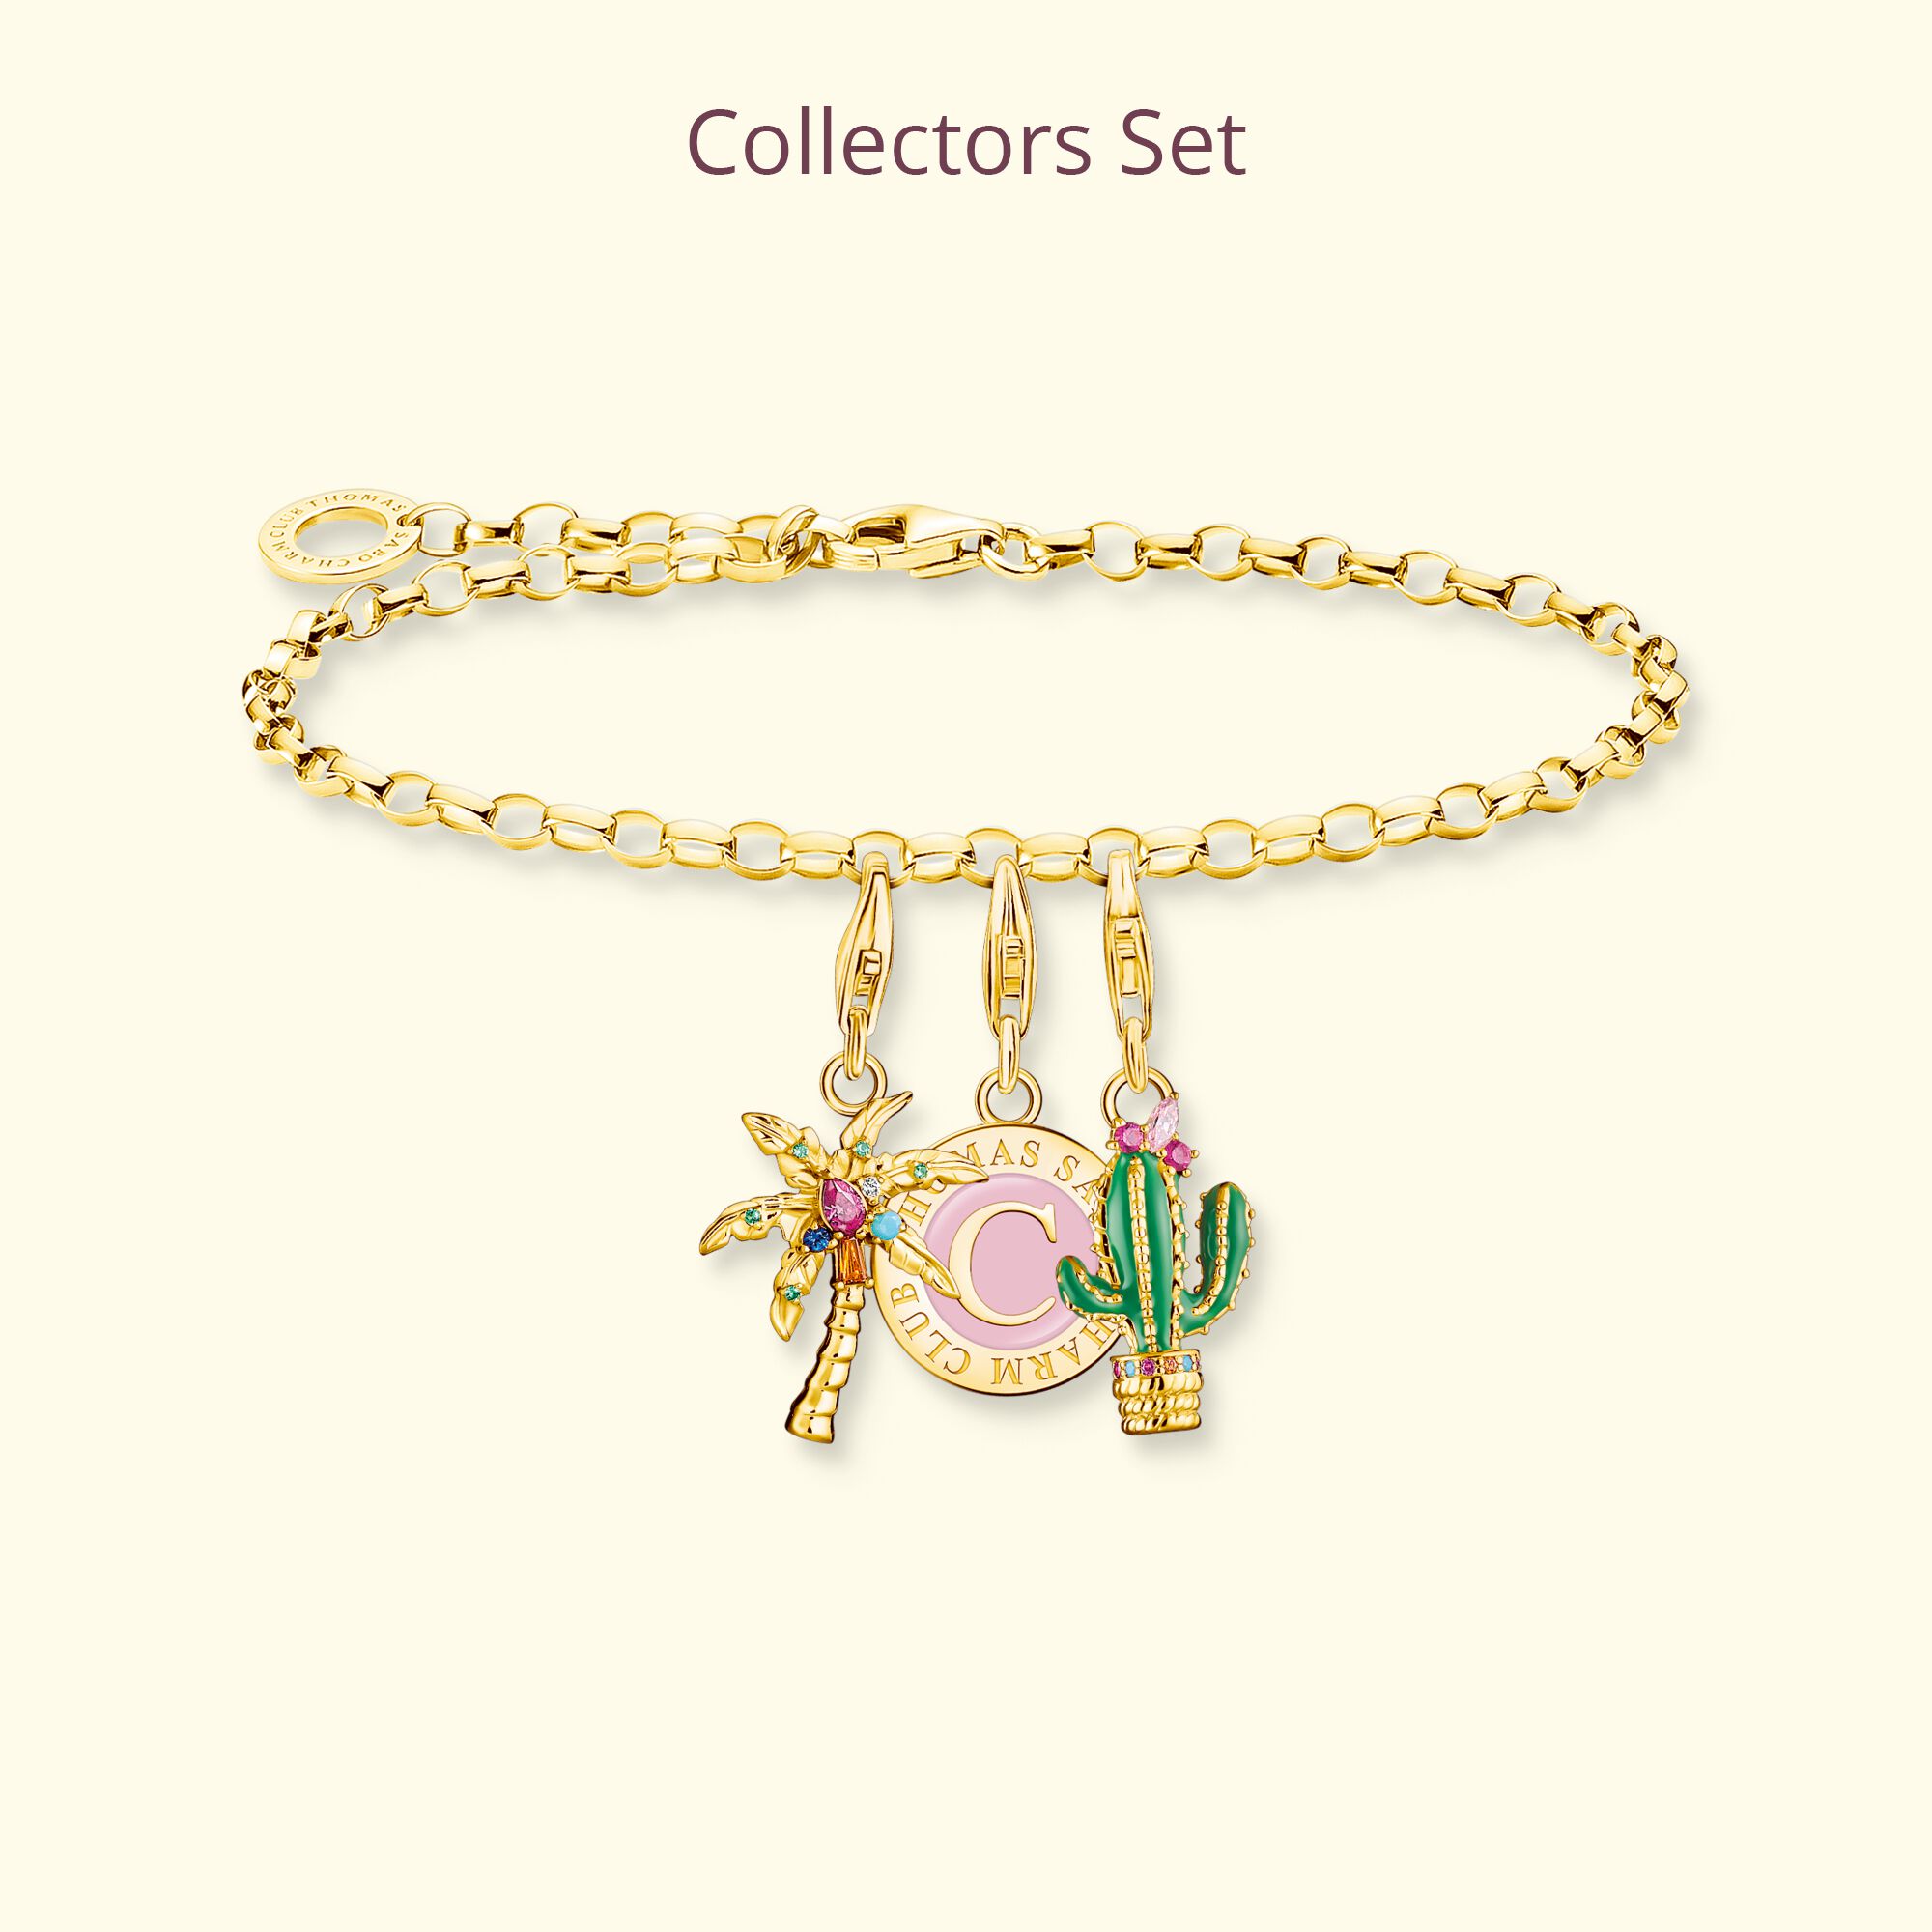 Gold plated CHARMISTA collectors set oasis from the Charm Club collection in the THOMAS SABO online store